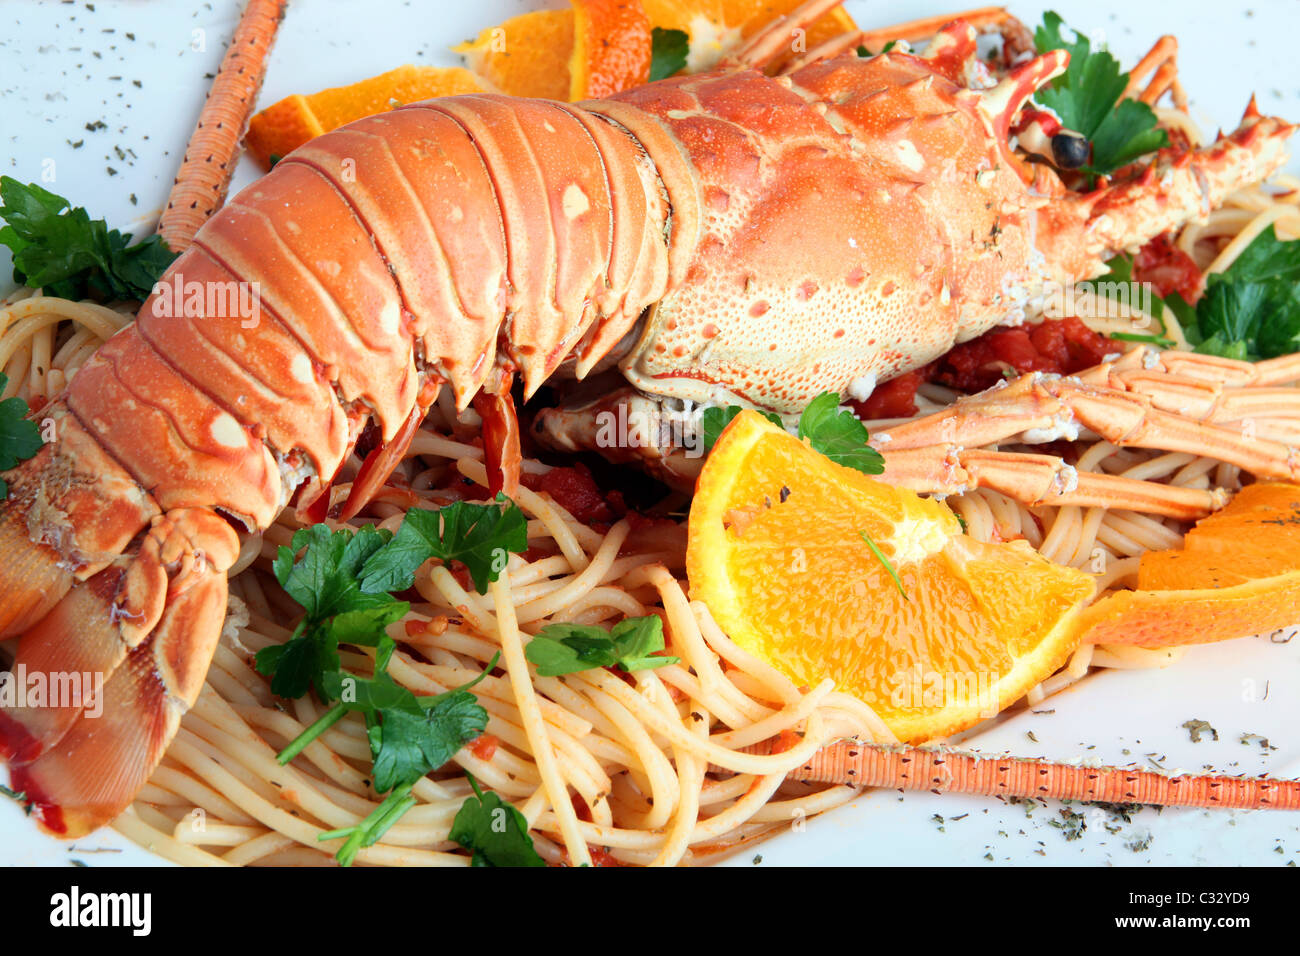 Cooked lobster on pasta decorated with slices of orange and parsley, Greece Stock Photo